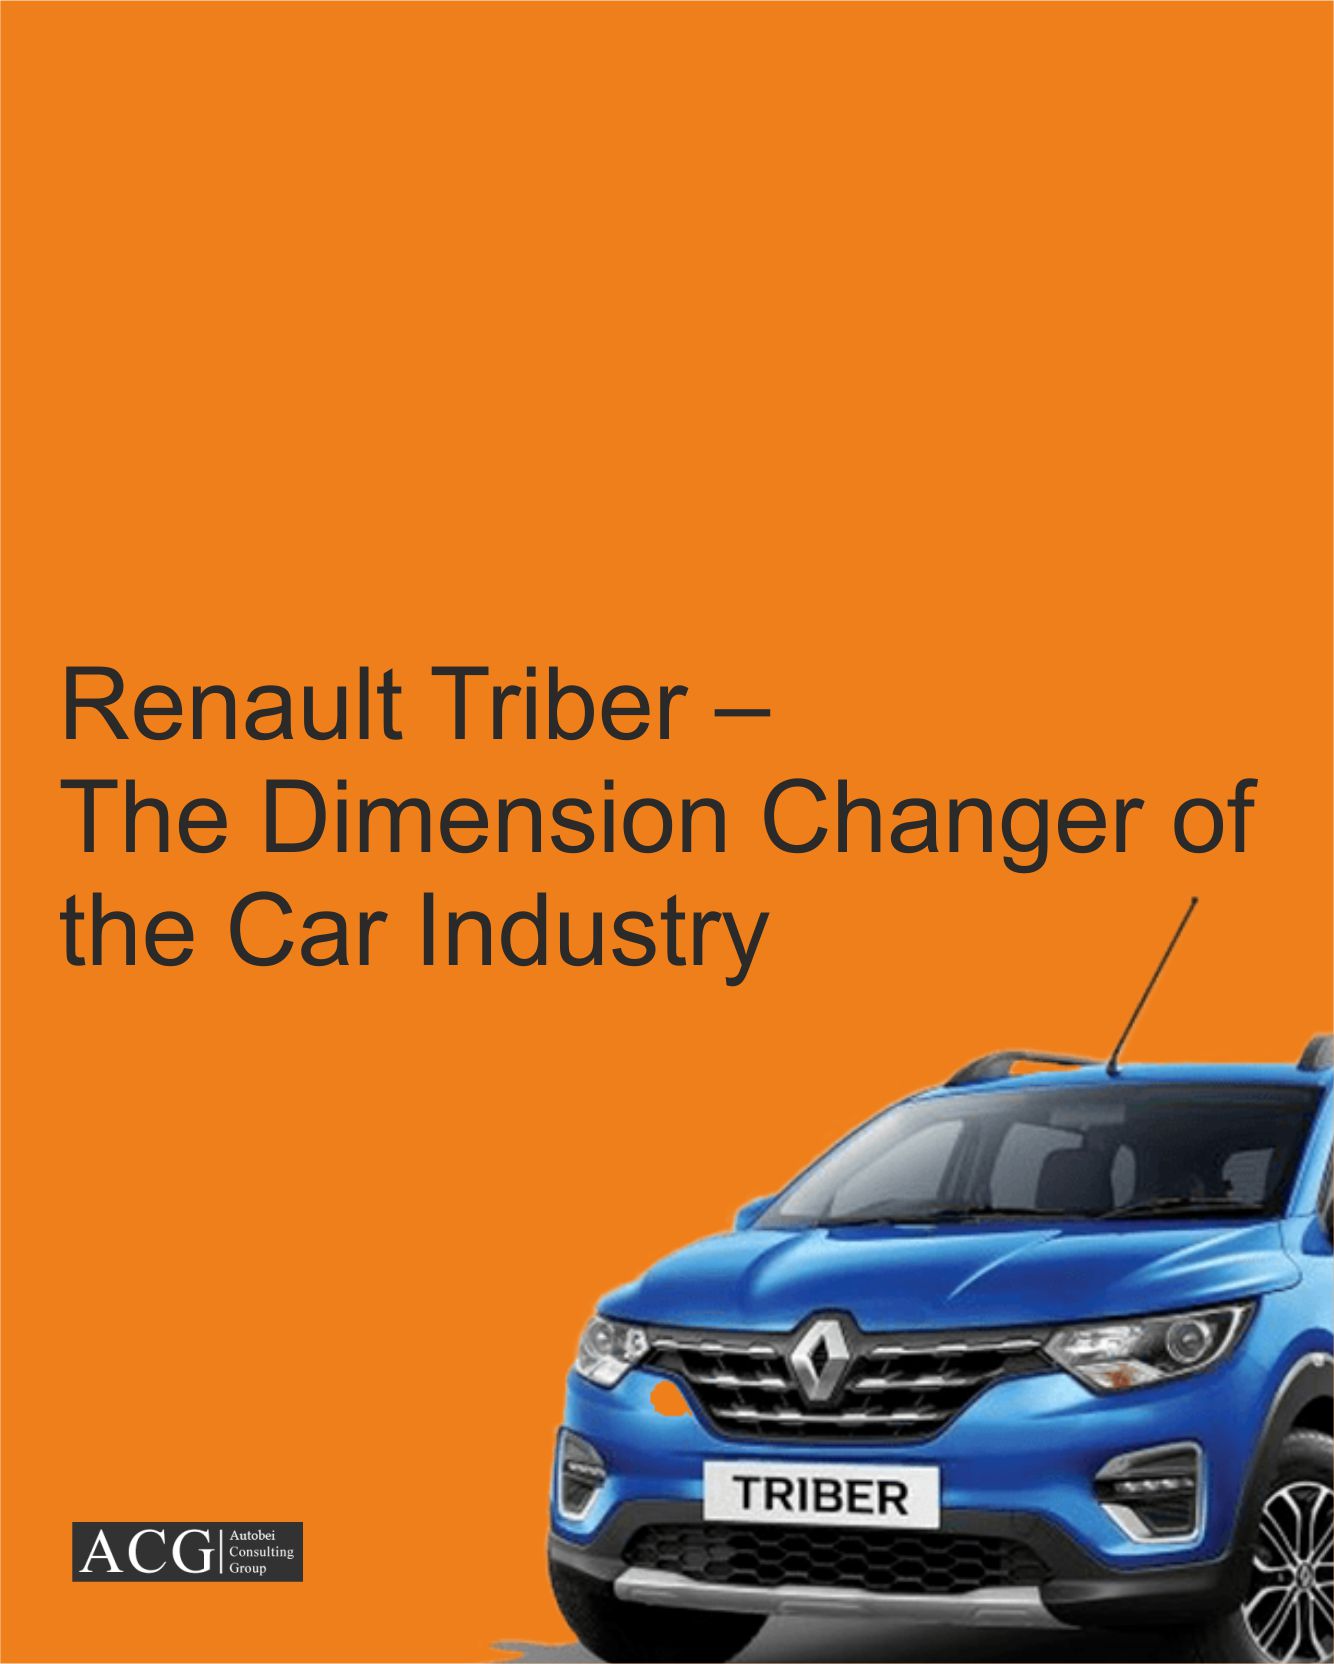 Renault Strategy for Indian car Market